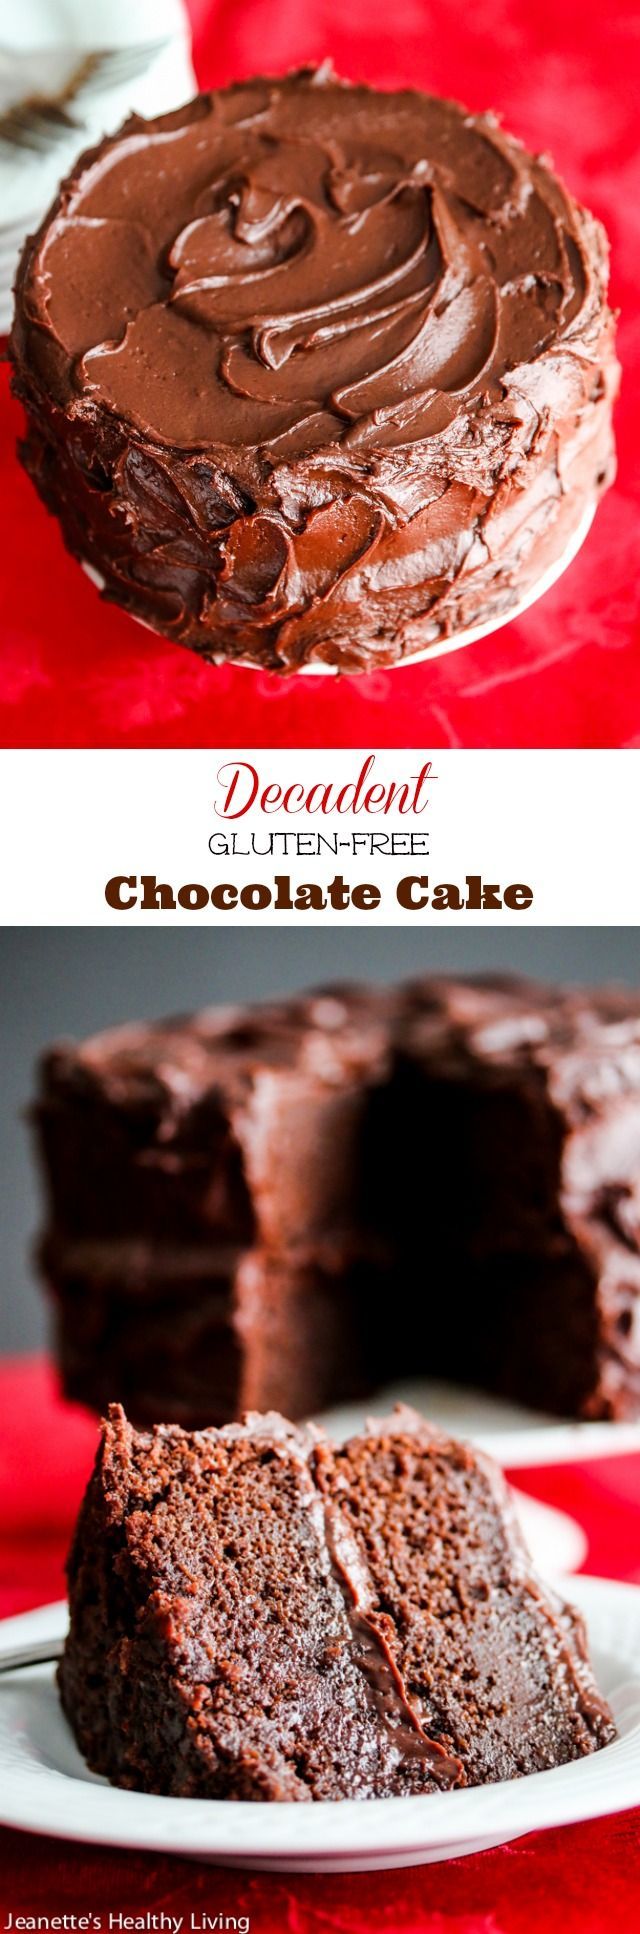 Decadent Gluten-Free Chocolate Cake – so chocolatey and rich, no one will guess it’s gluten-free. Perfect for the holiday dessert